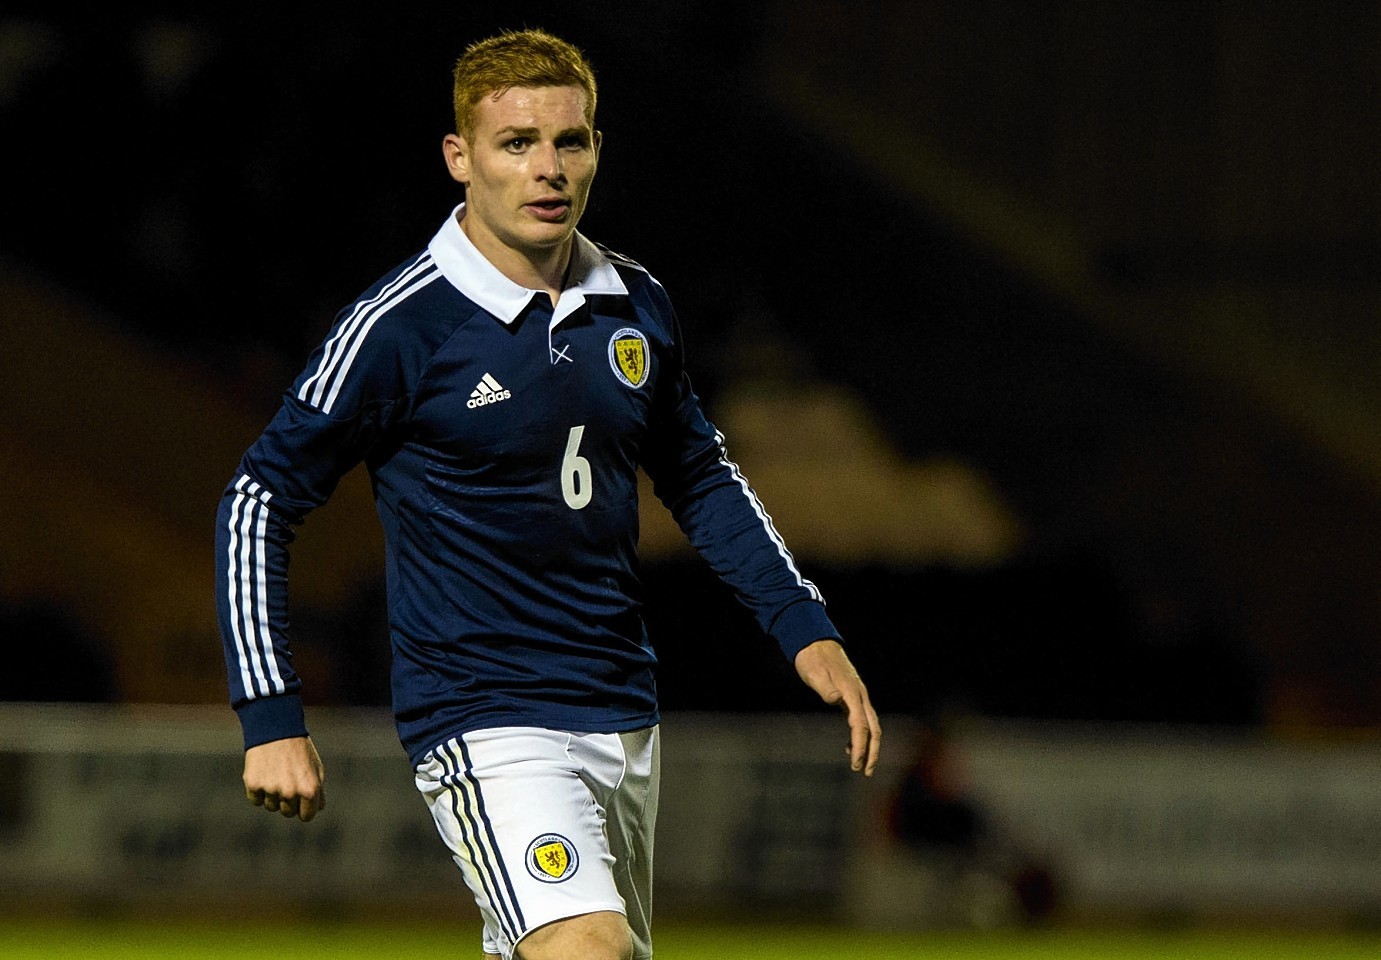 McGhee is backing Fraser Fyvie to get back to his best